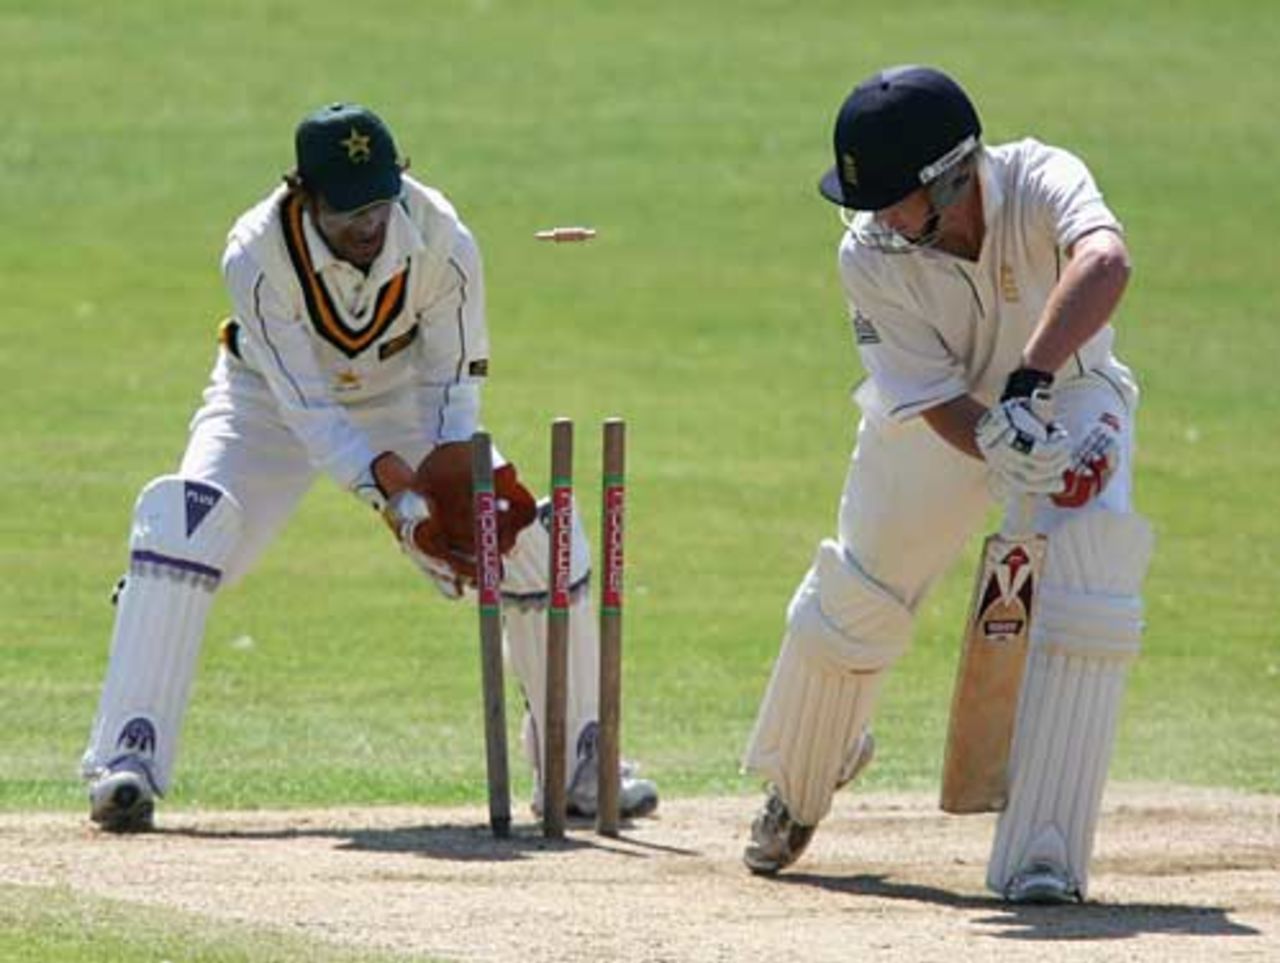 Tom Westley is bowled by Imad Wasim for 7, England Under-19 v Pakistan Under-19, 1st Test, Scarborough, August 5, 2007